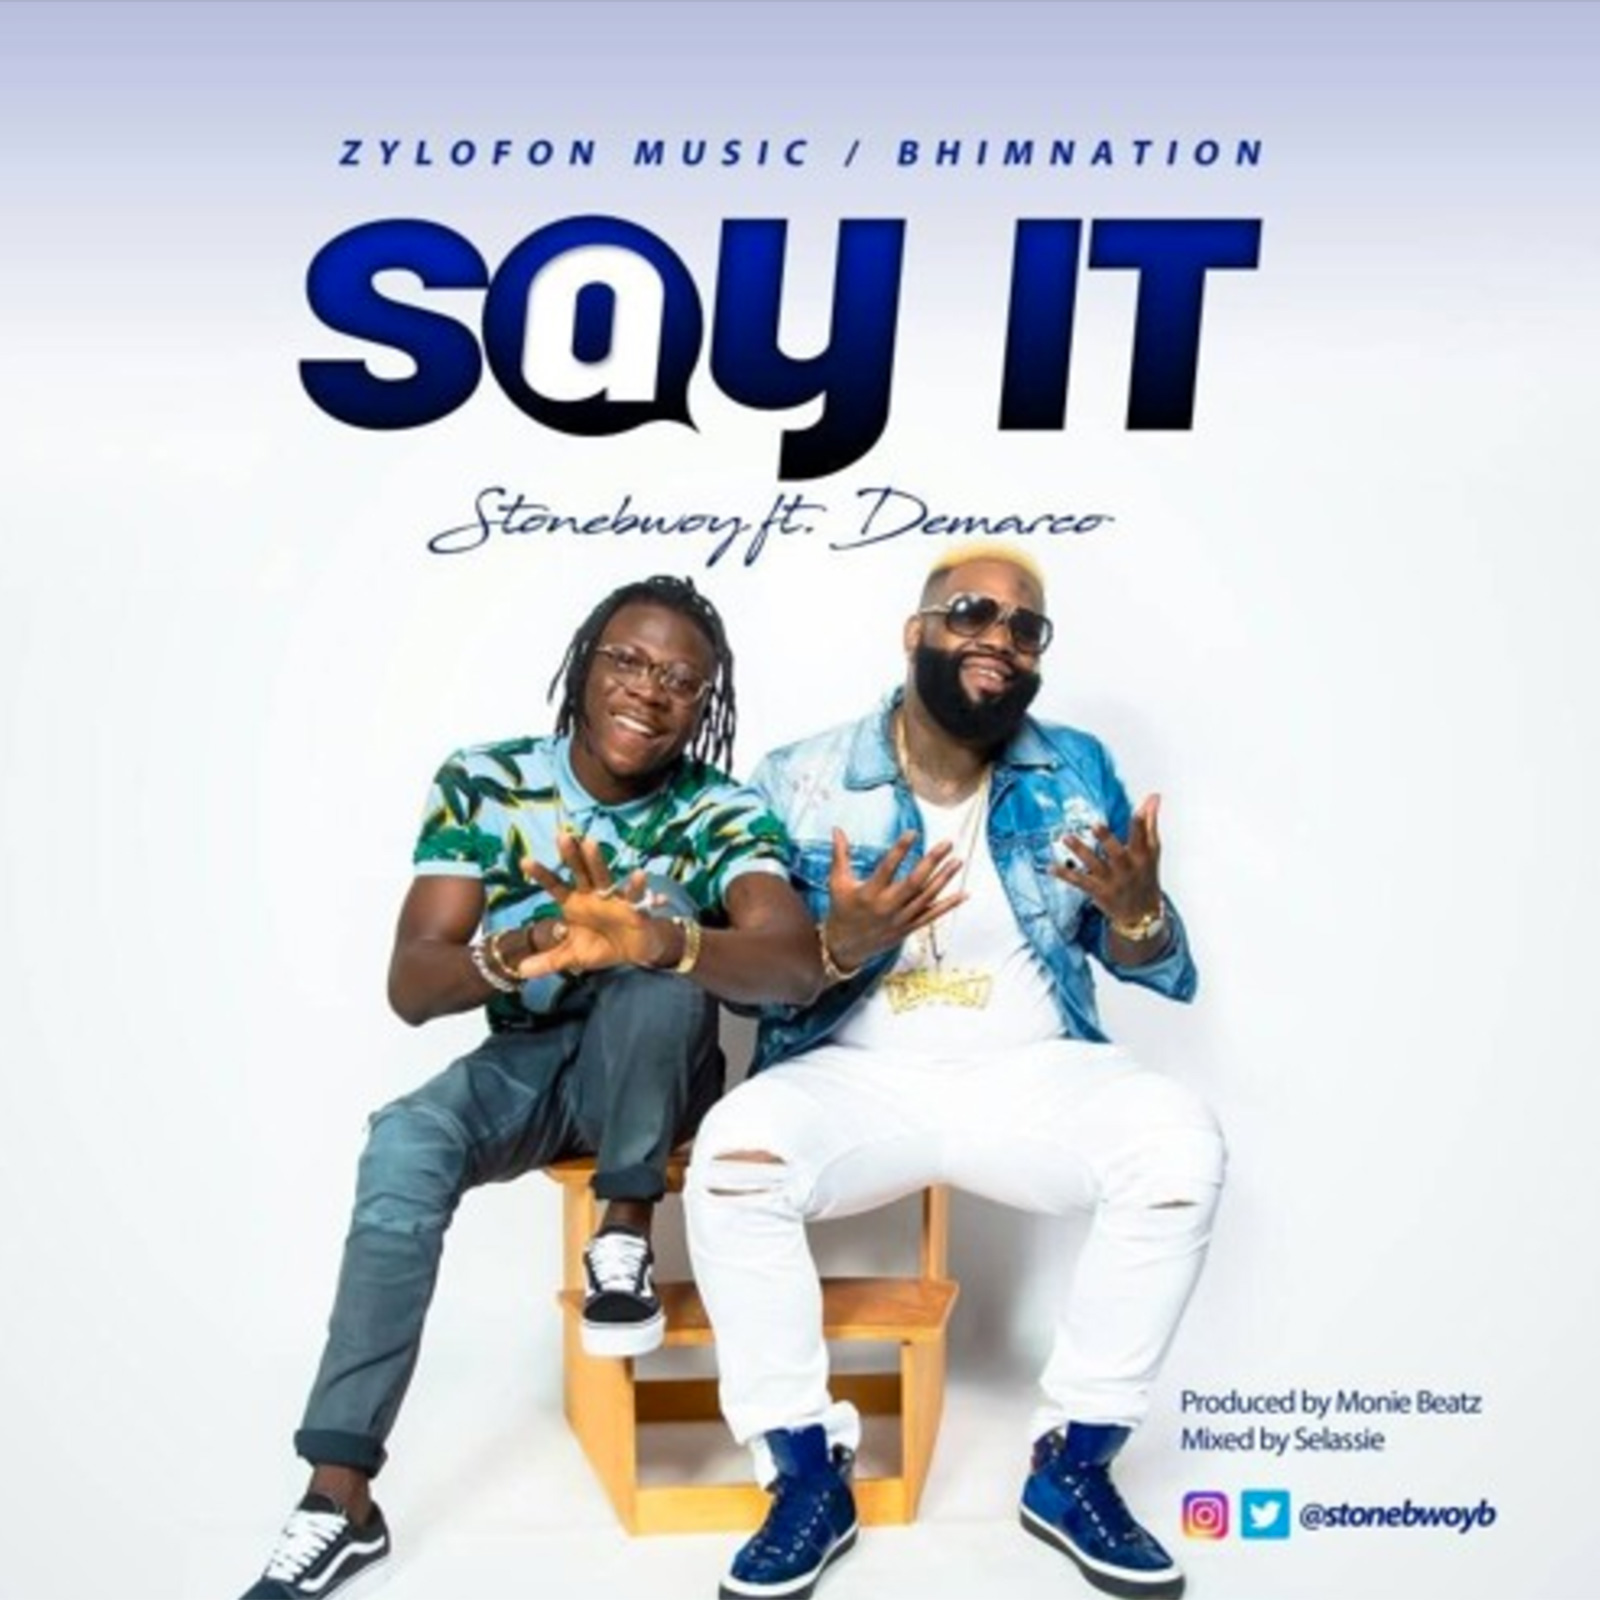 Say It by Stonebwoy feat. Demarco